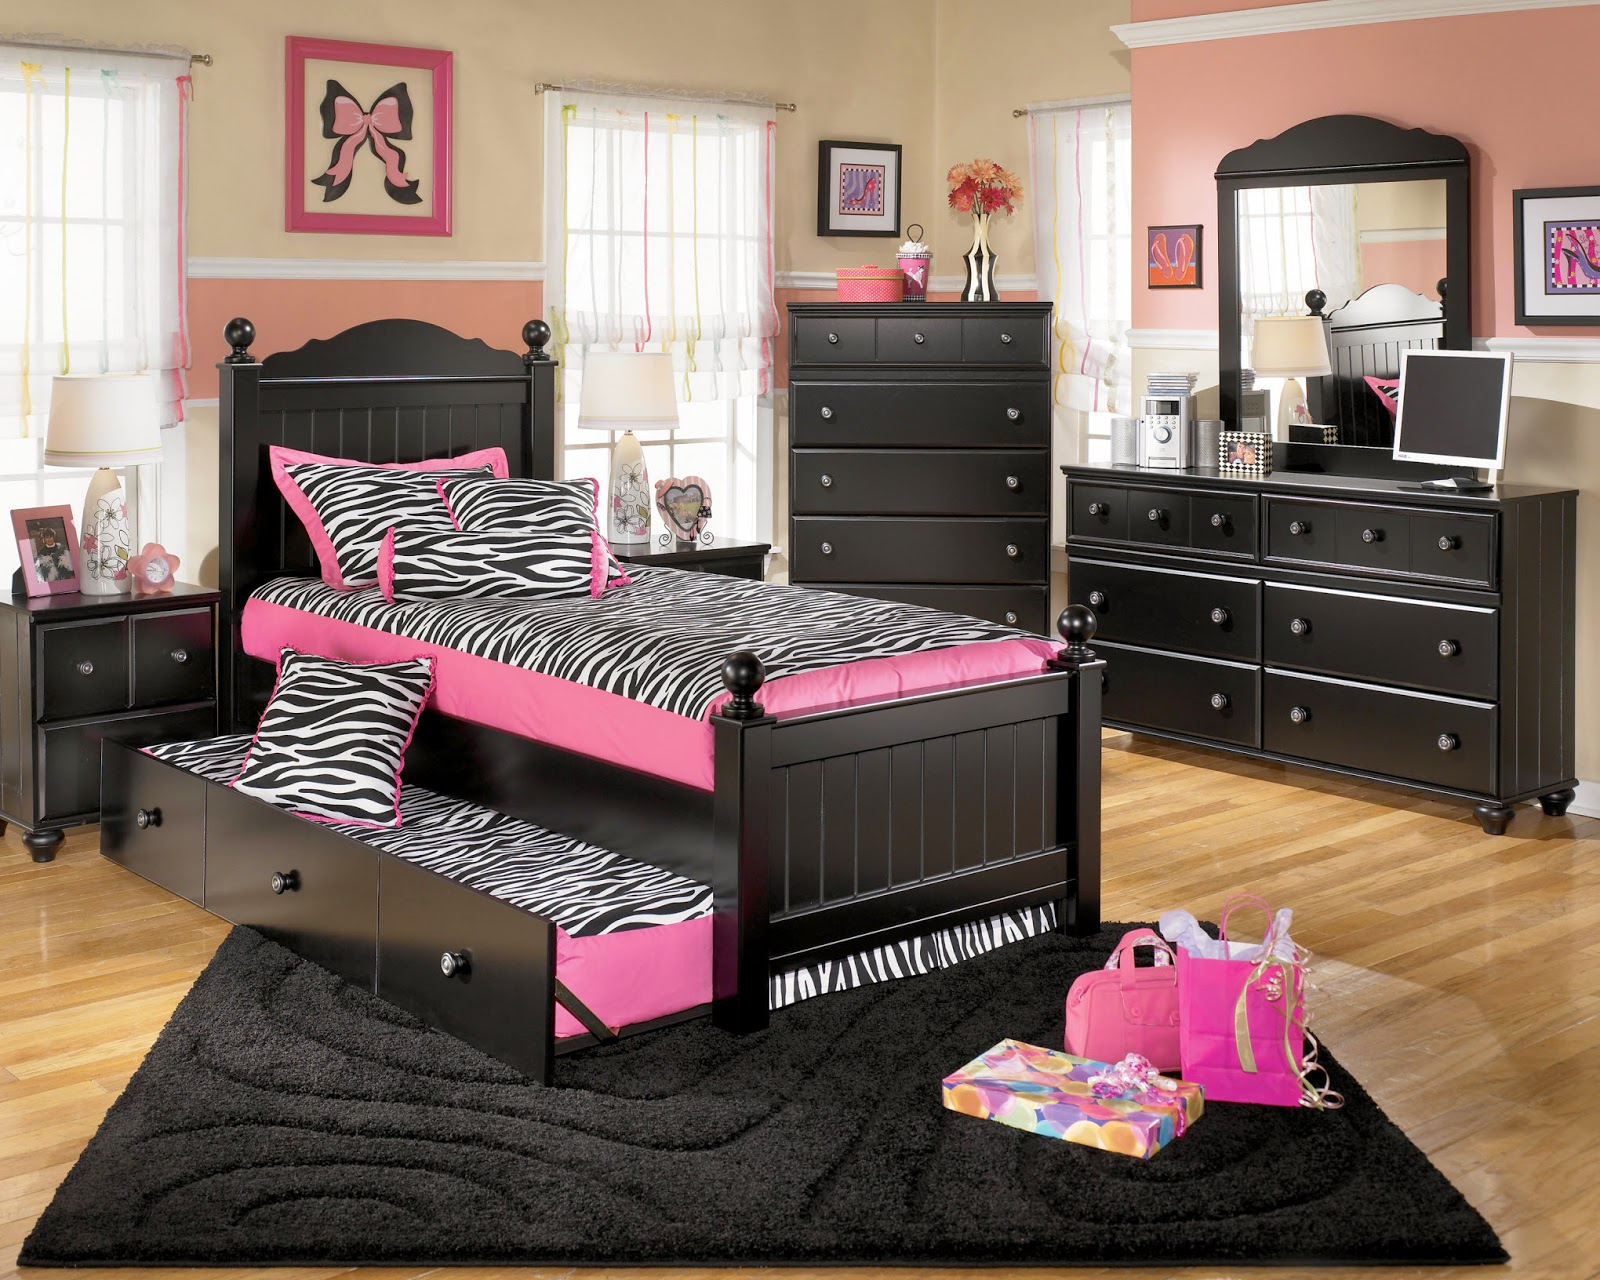 Girls Bedroom Sets Bedroom And Bathroom Ideas throughout dimensions 1600 X 1280